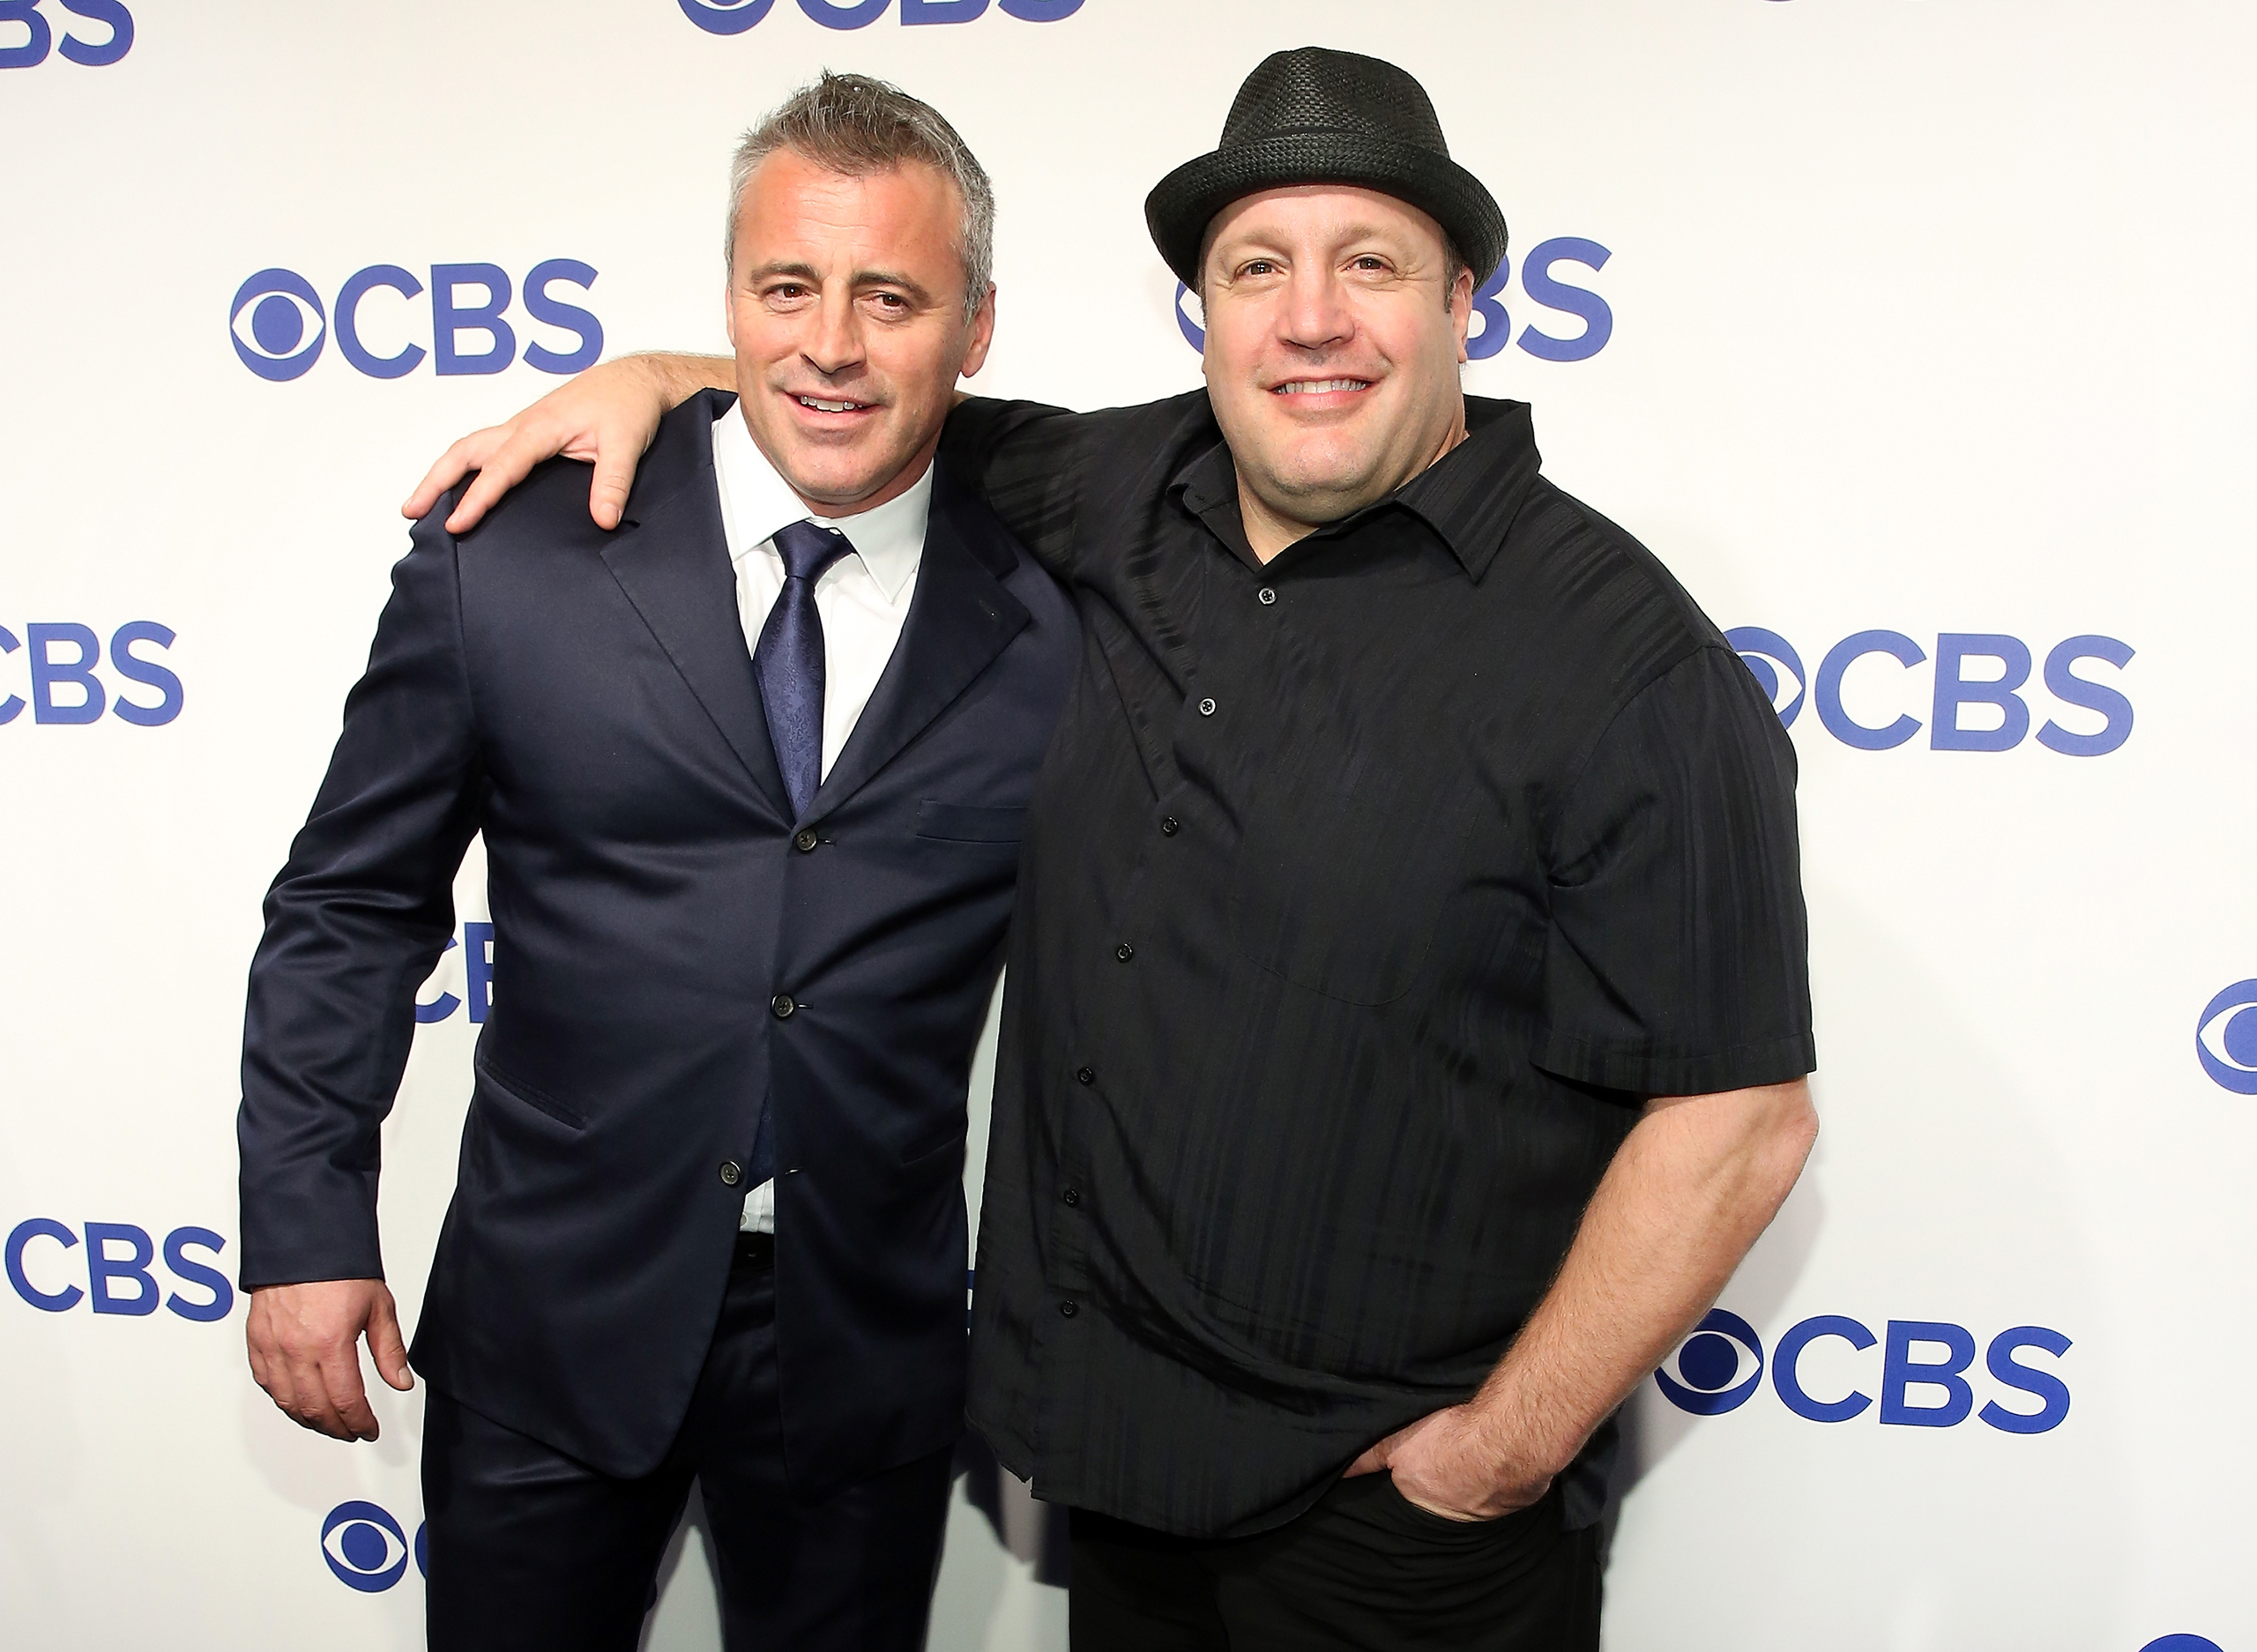 Matt LeBlanc and Kevin James attend the 2016 CBS Upfront at Oak Room in New York City on May 18, 2016. (Monica Schipper—FilmMagic/Getty Images)